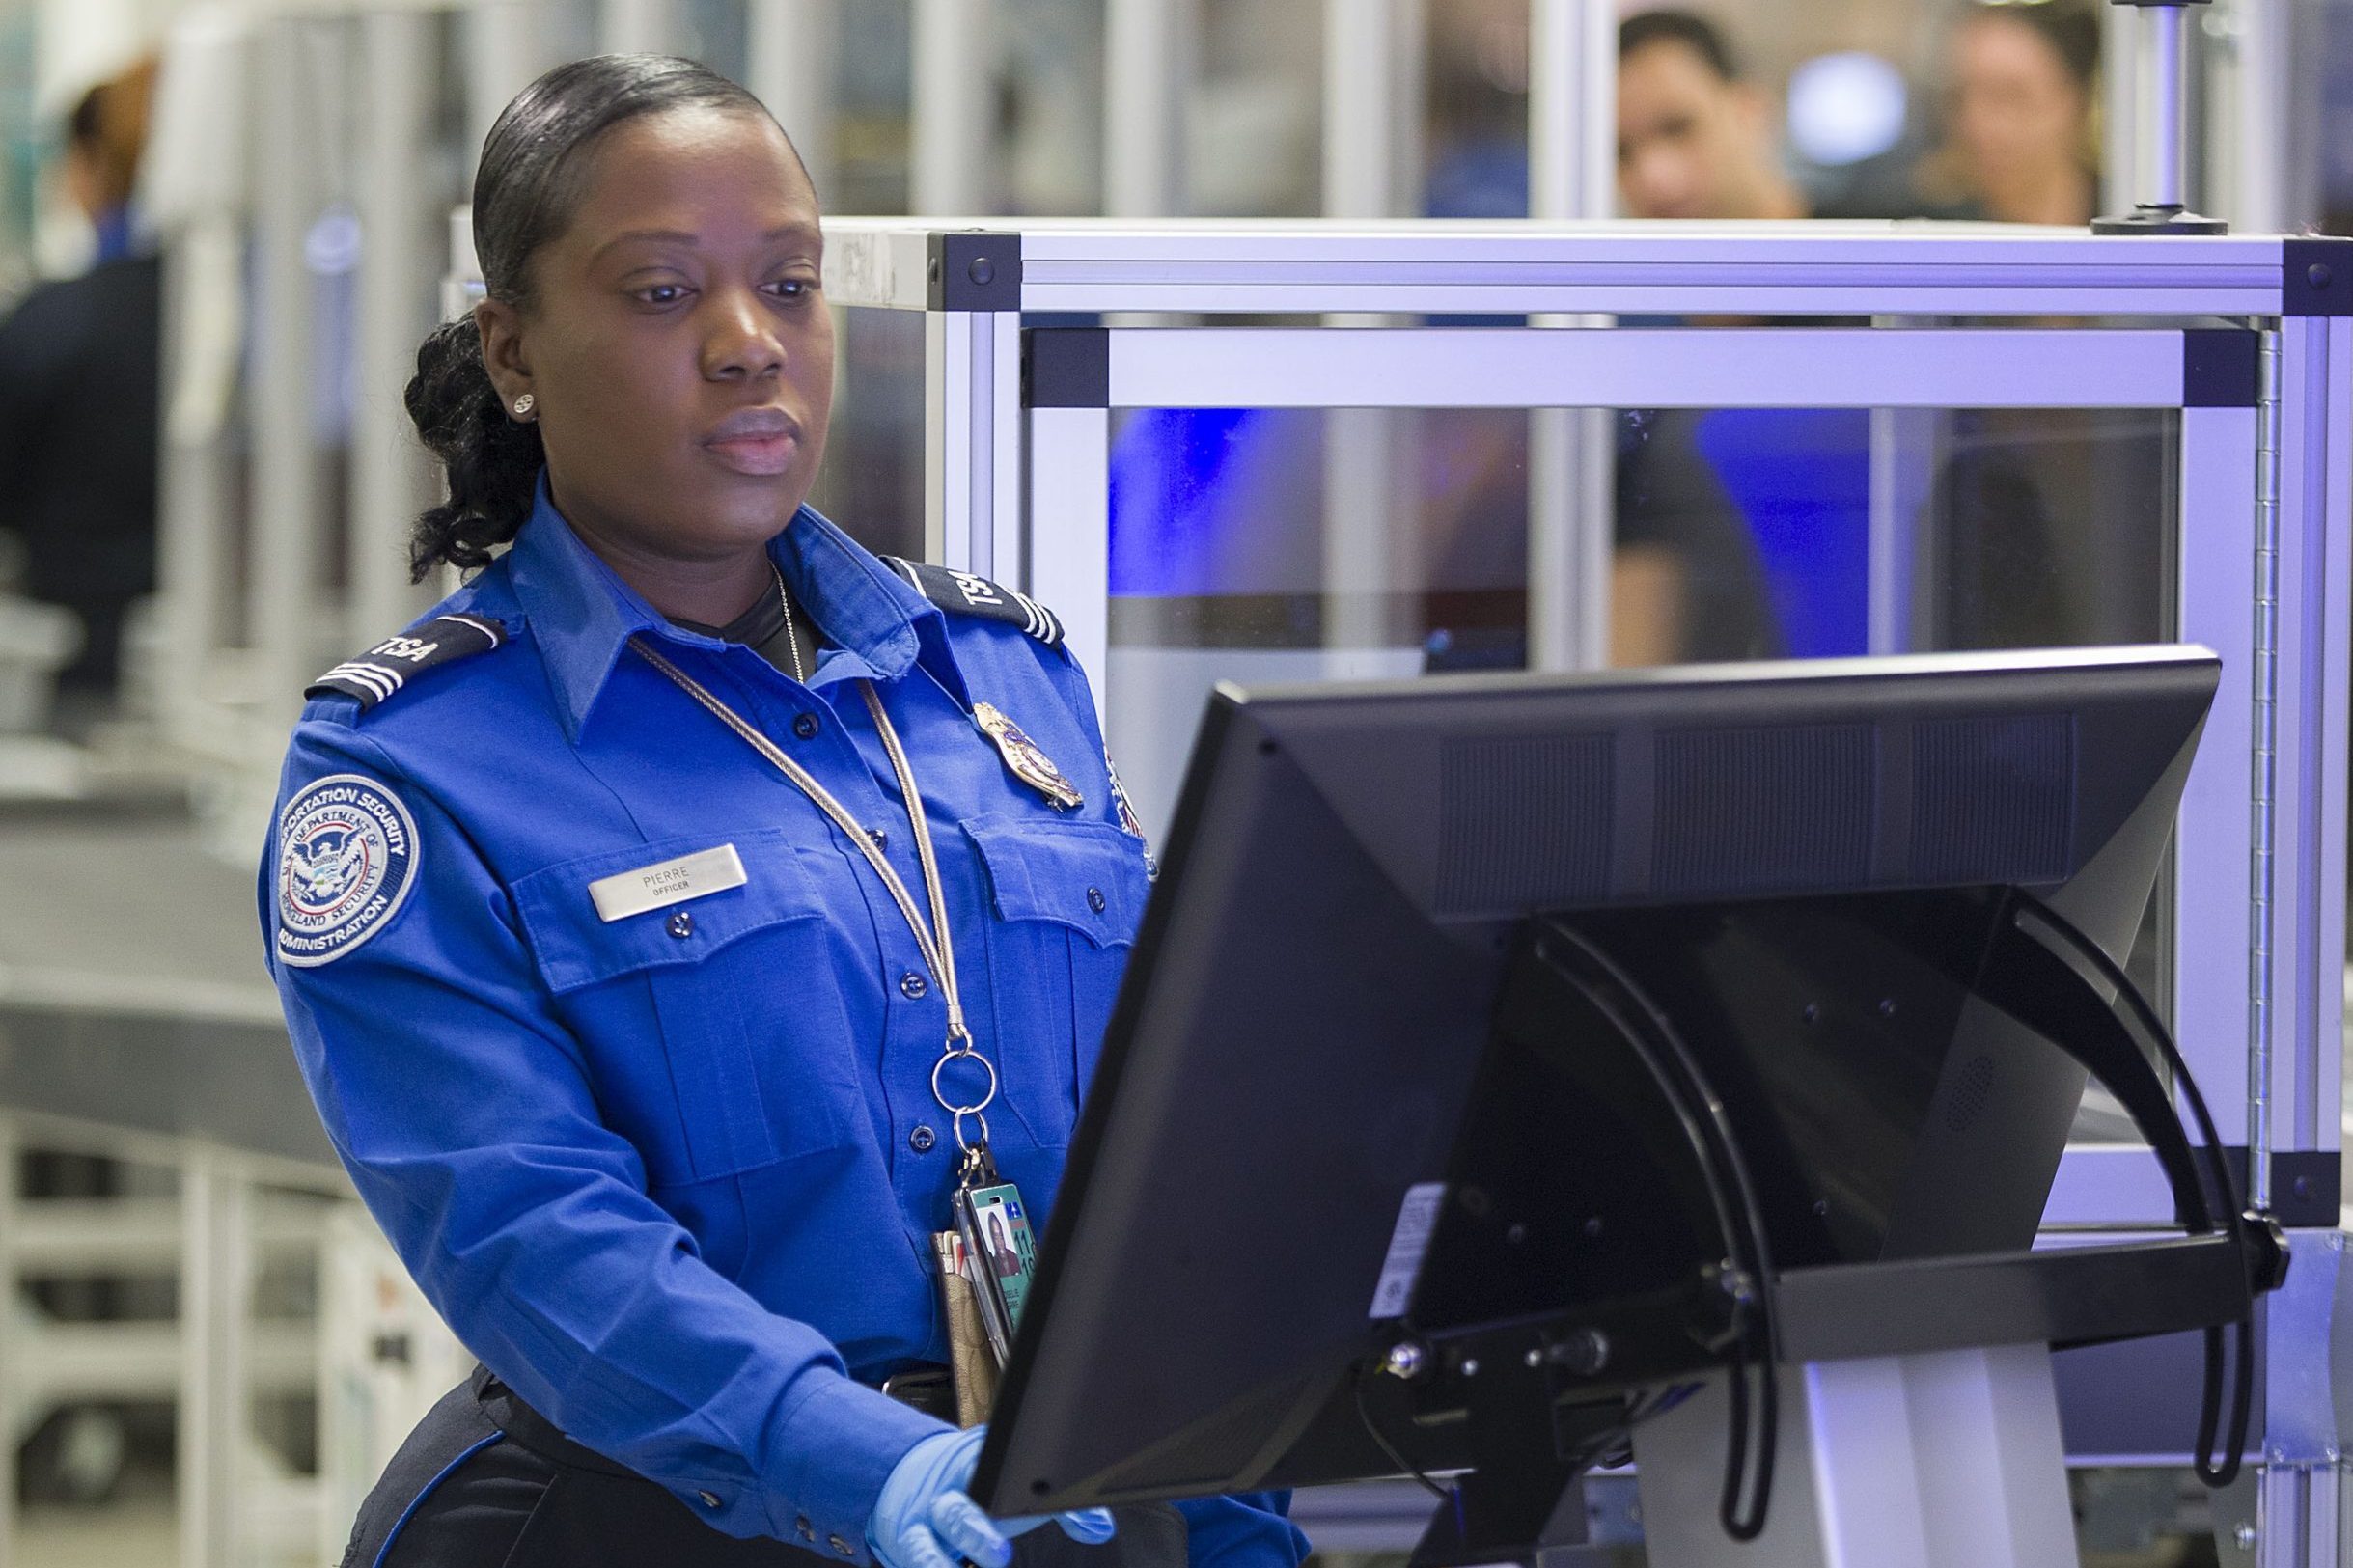 A speedy way to save time & skip stress through airport security